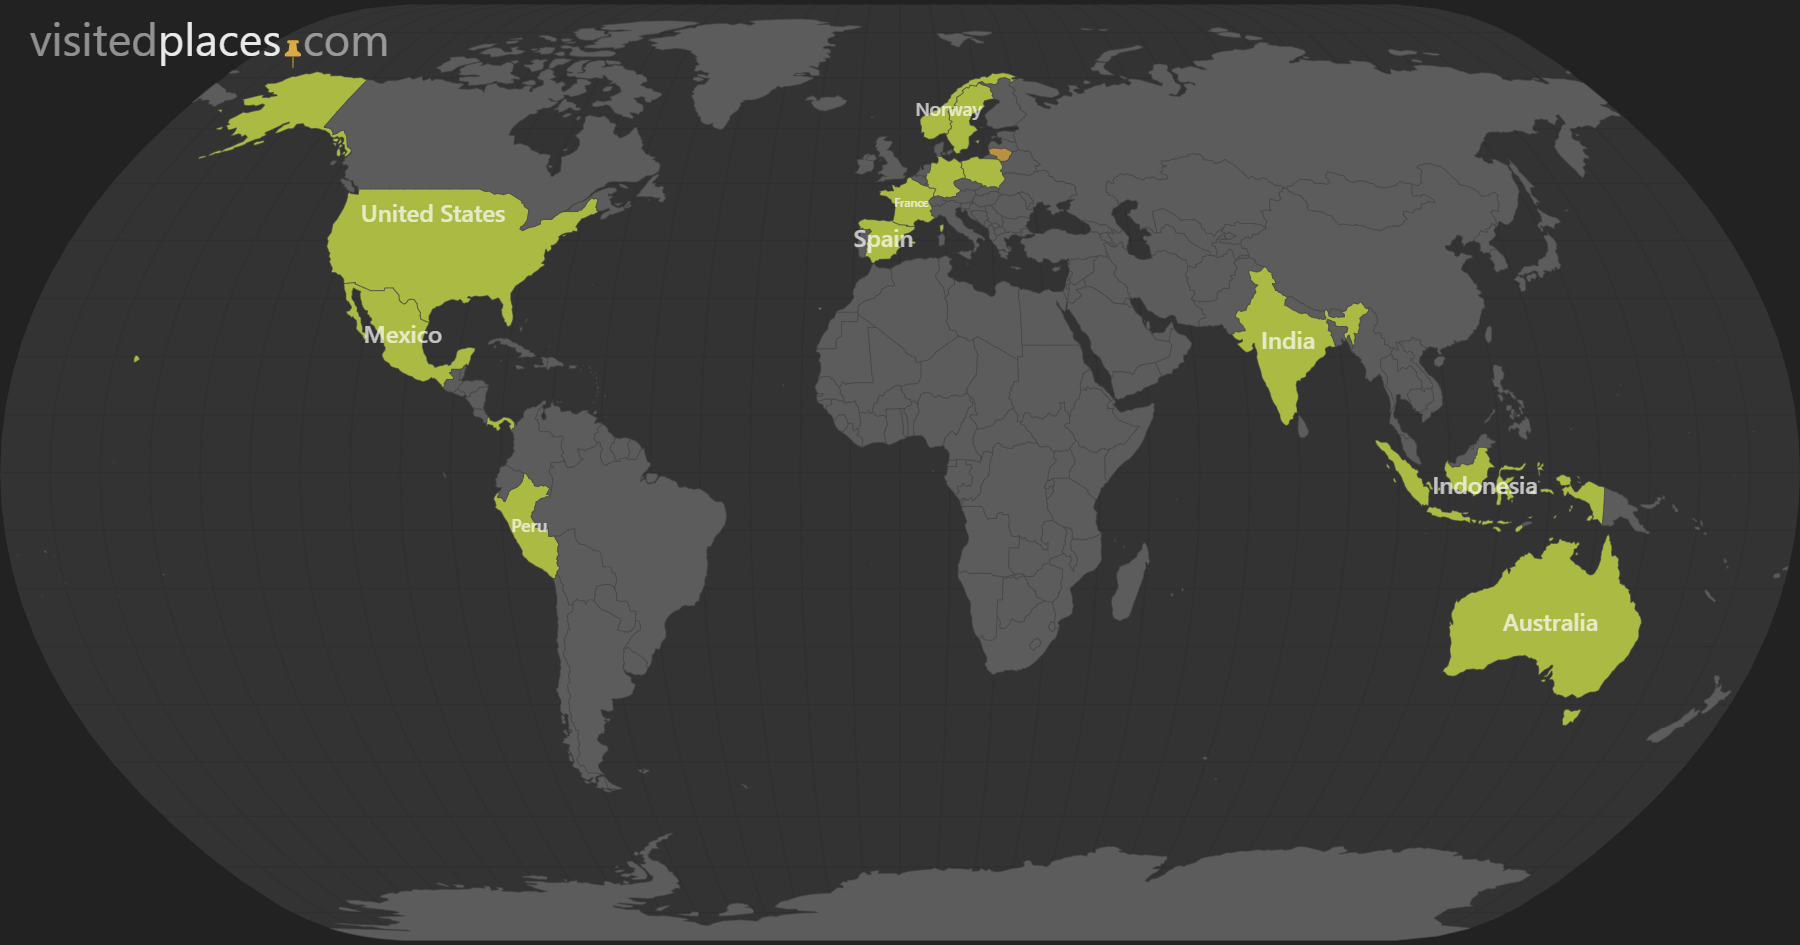 Maps to scratch to mark the countries visited - mytripmap